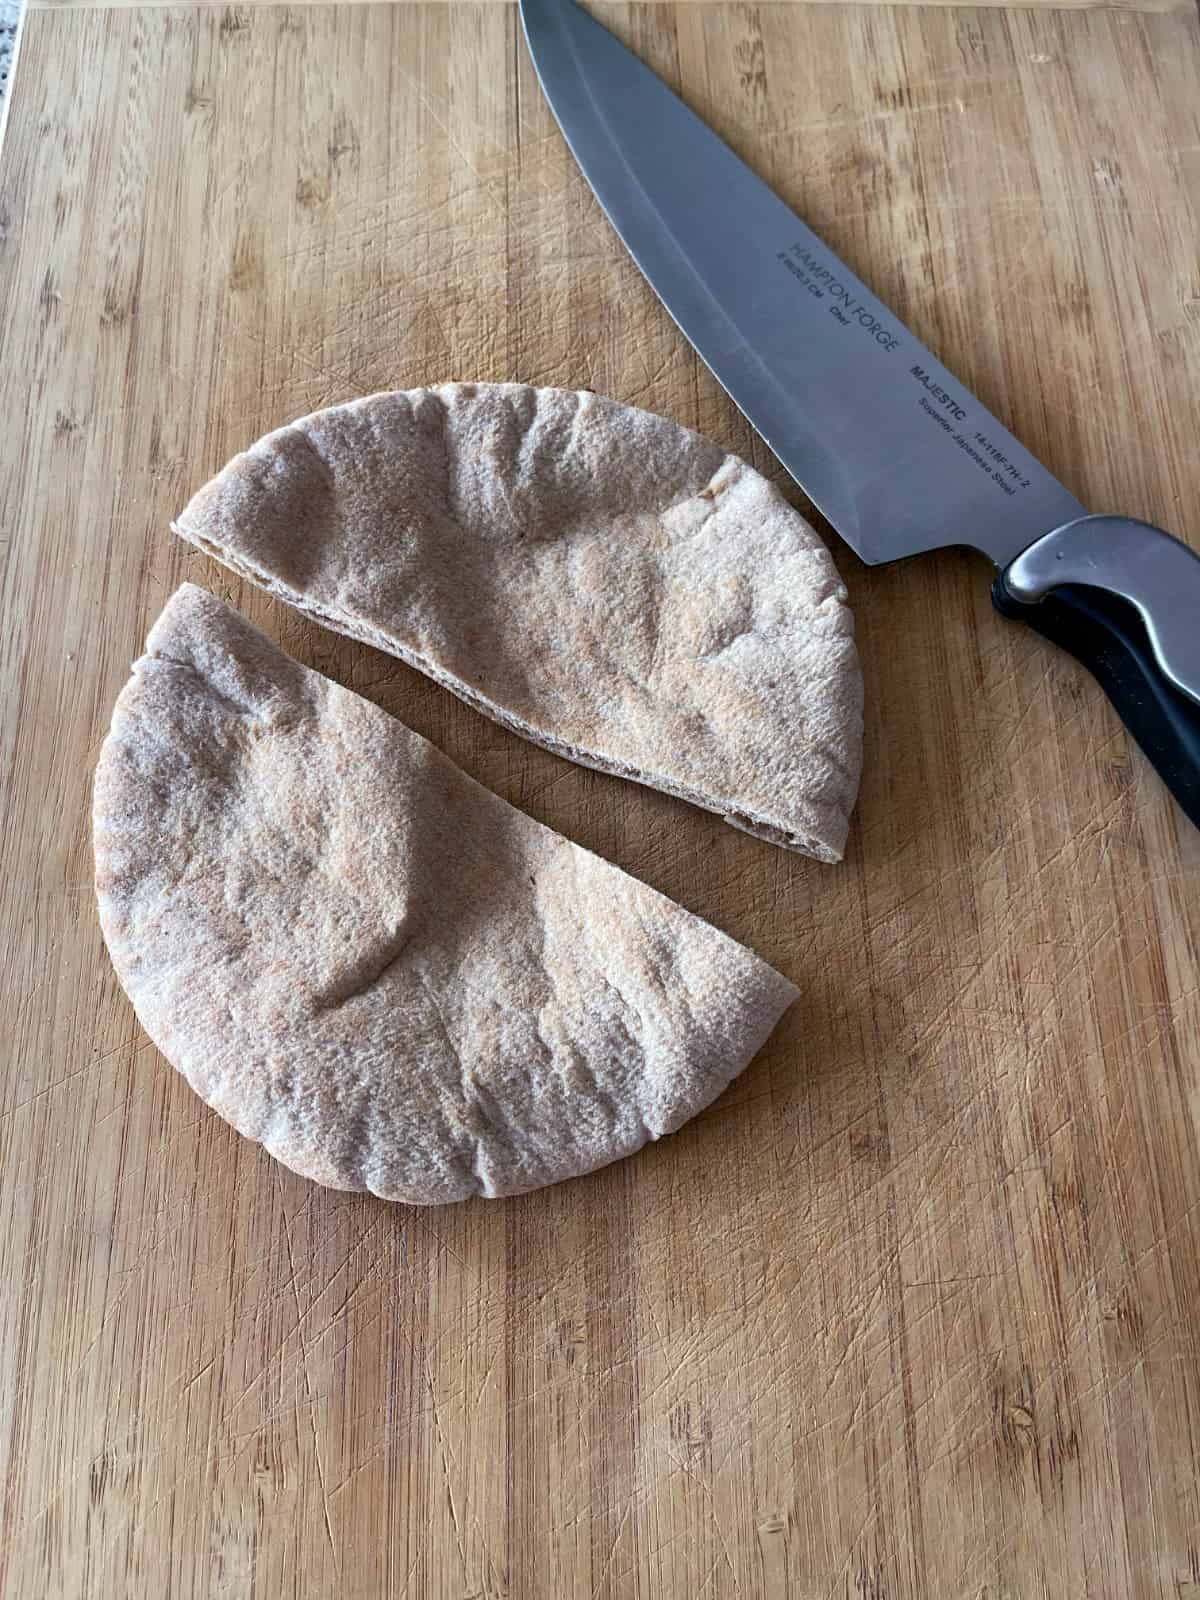 A whole wheat pita cut in half with a knife on a bamboo board.